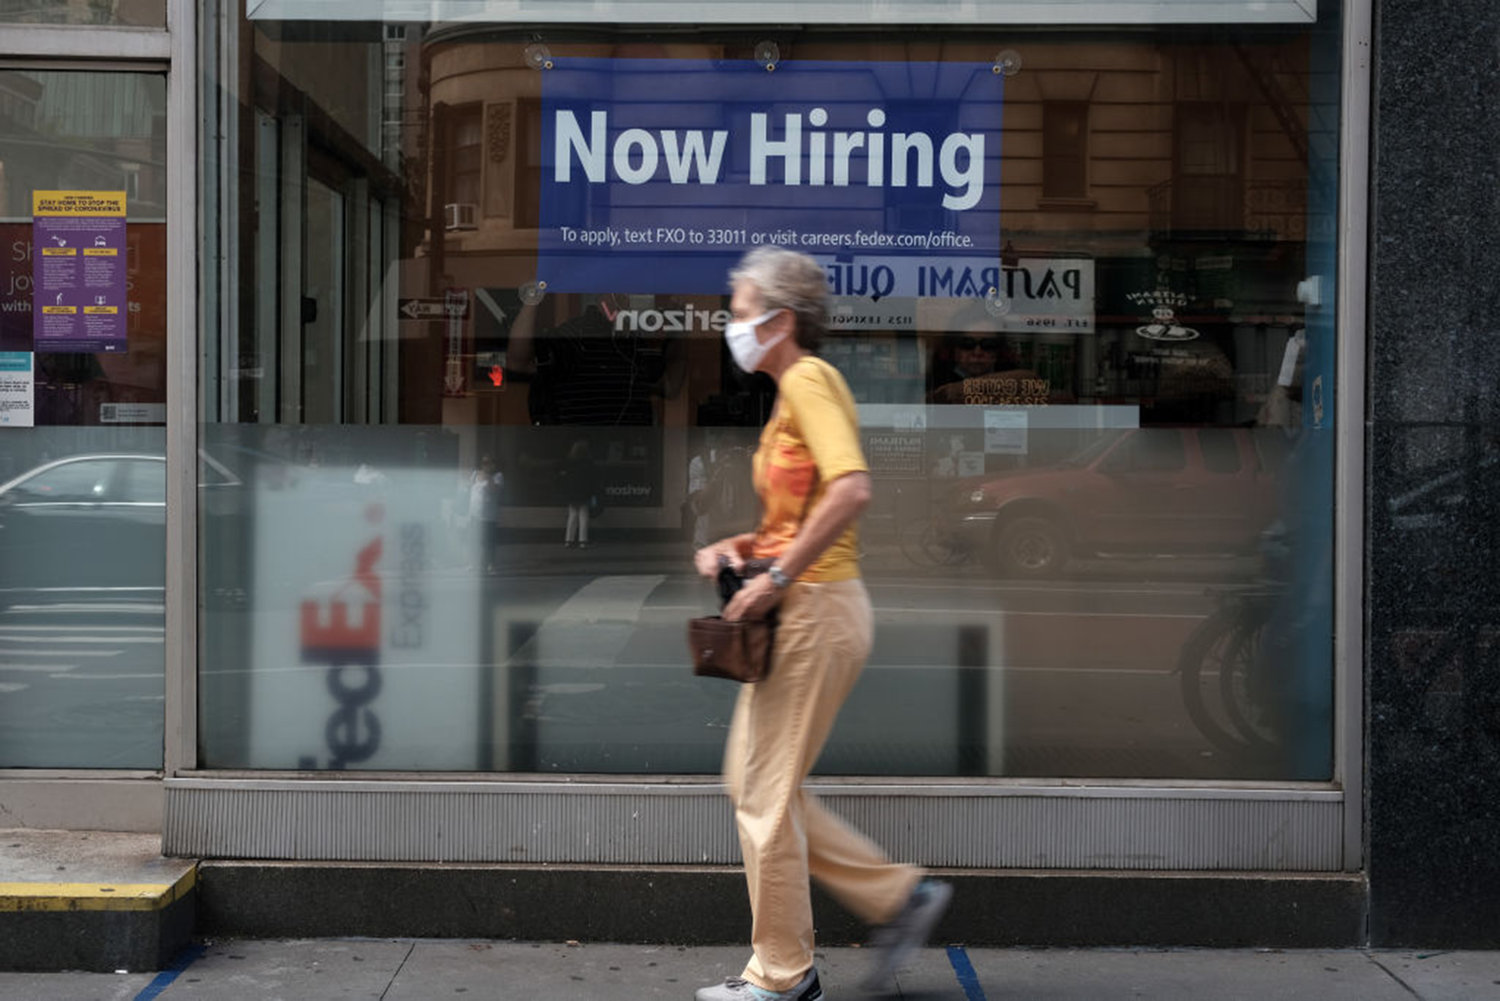 A hiring sign is displayed in a store window in Manhattan on August 19, 2021 in New York City. (Spencer Platt/Getty Images/TNS)